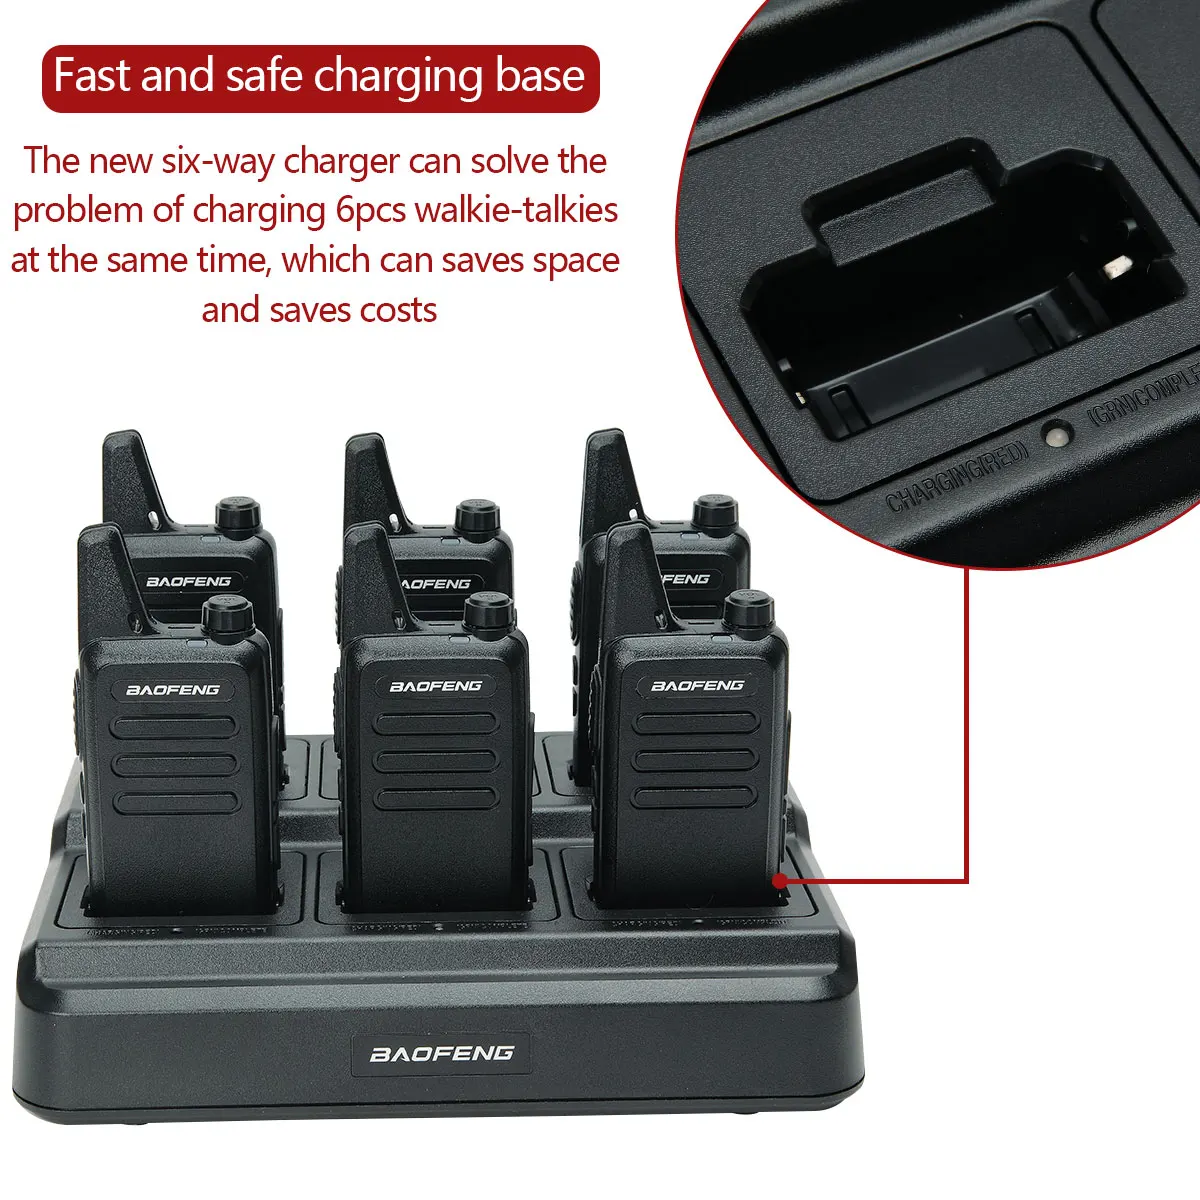 6Pcs Baofeng BF-T20 Mini Powerful Walkie Talkie 16 Channels Long Range Two  Way Radio with Six-Way Charger for Hotel Restaurant AliExpress